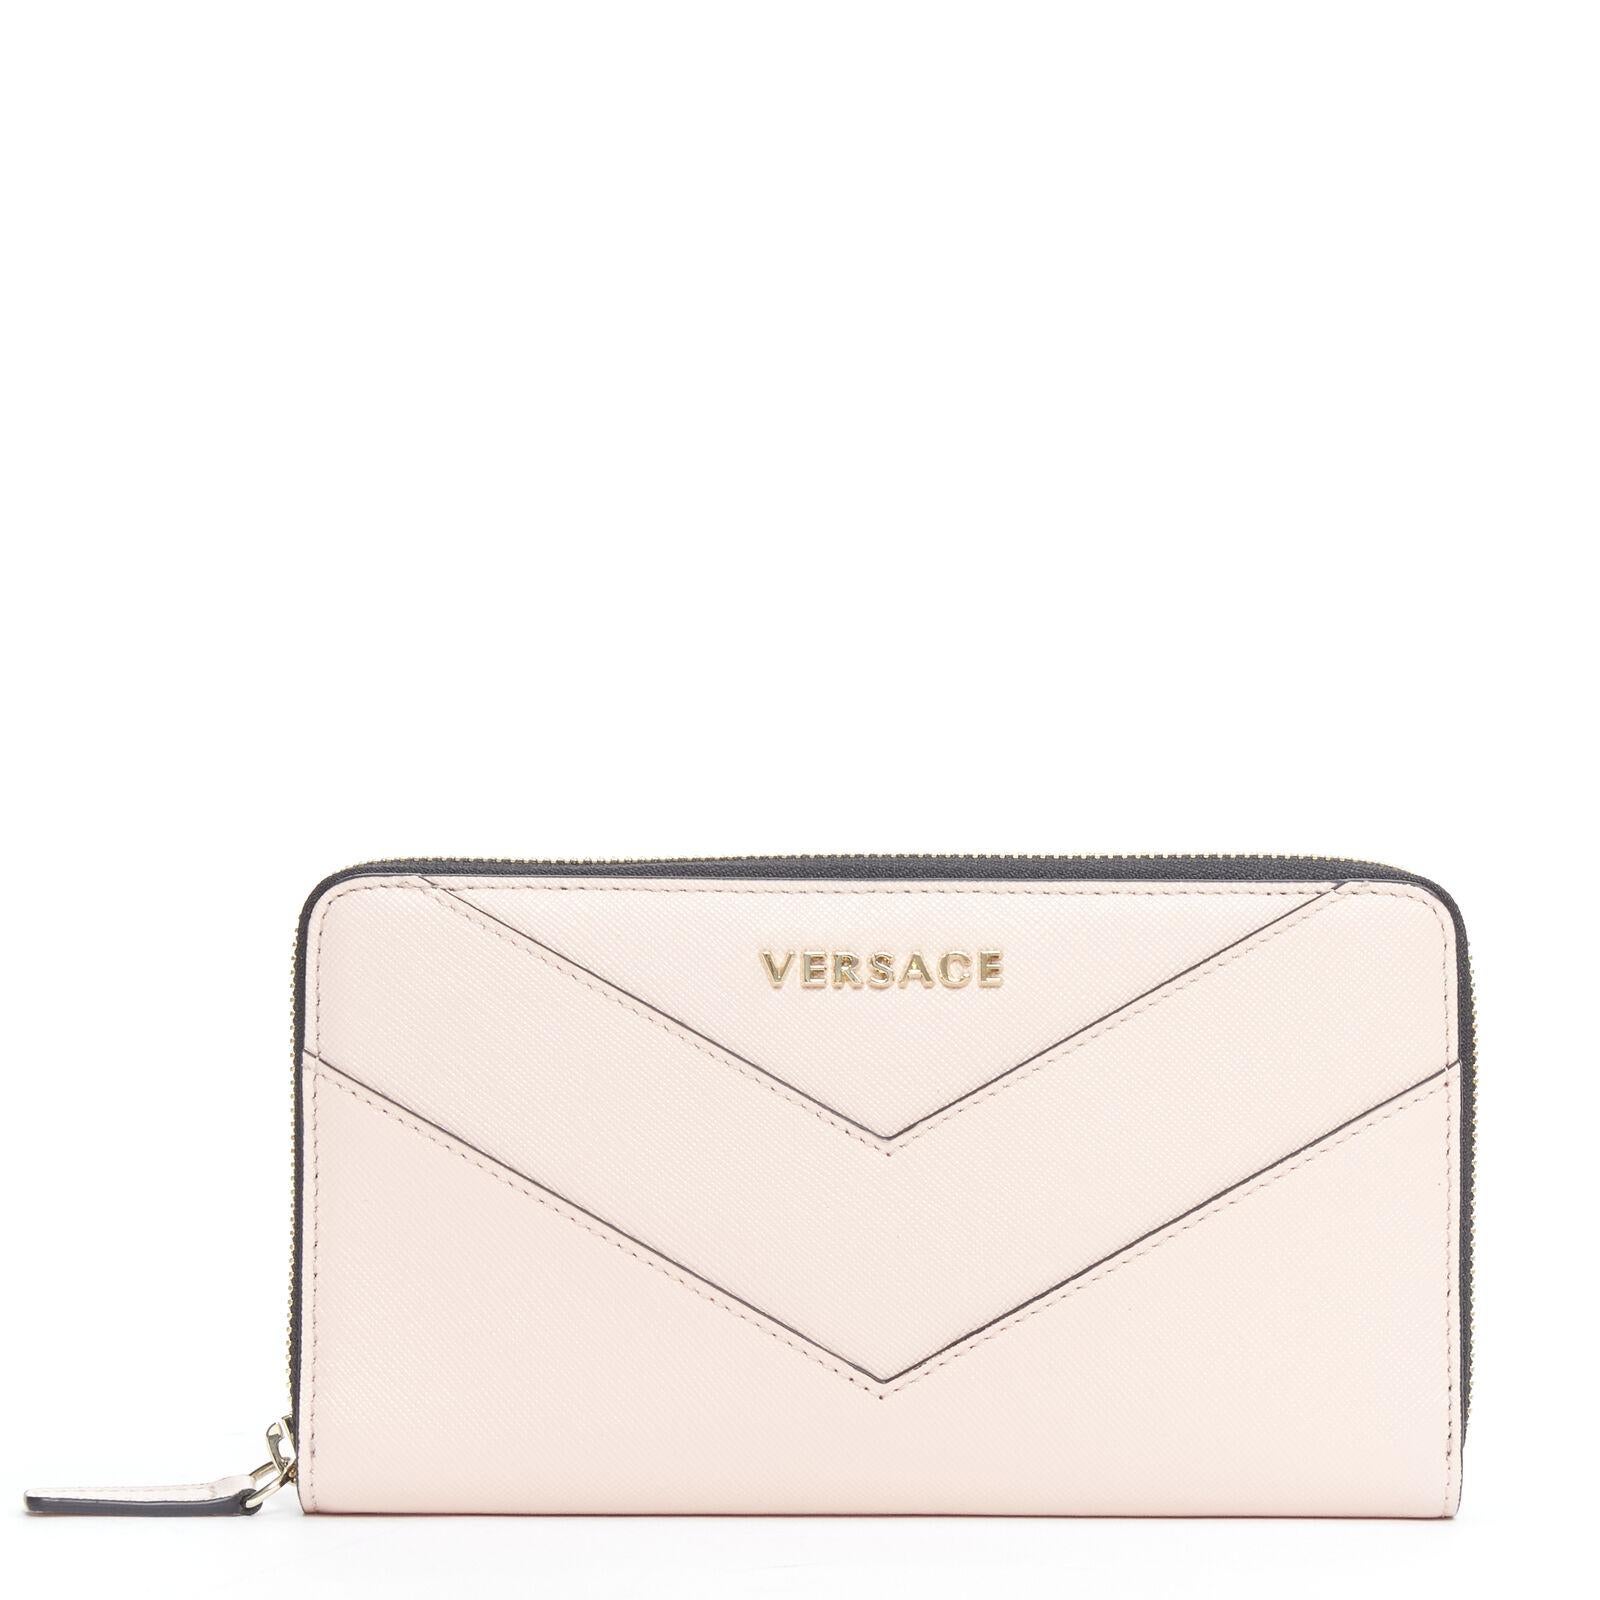 new VERSACE light pink saffiano leather gold logo V stitch continental wallet 
Reference: TGAS/B01207 
Brand: Versace 
Designer: Donatella Versace 
Material: Leather 
Color: Pink 
Pattern: Solid 
Closure: Zip 
Extra Detail: Blush light pink saffiano